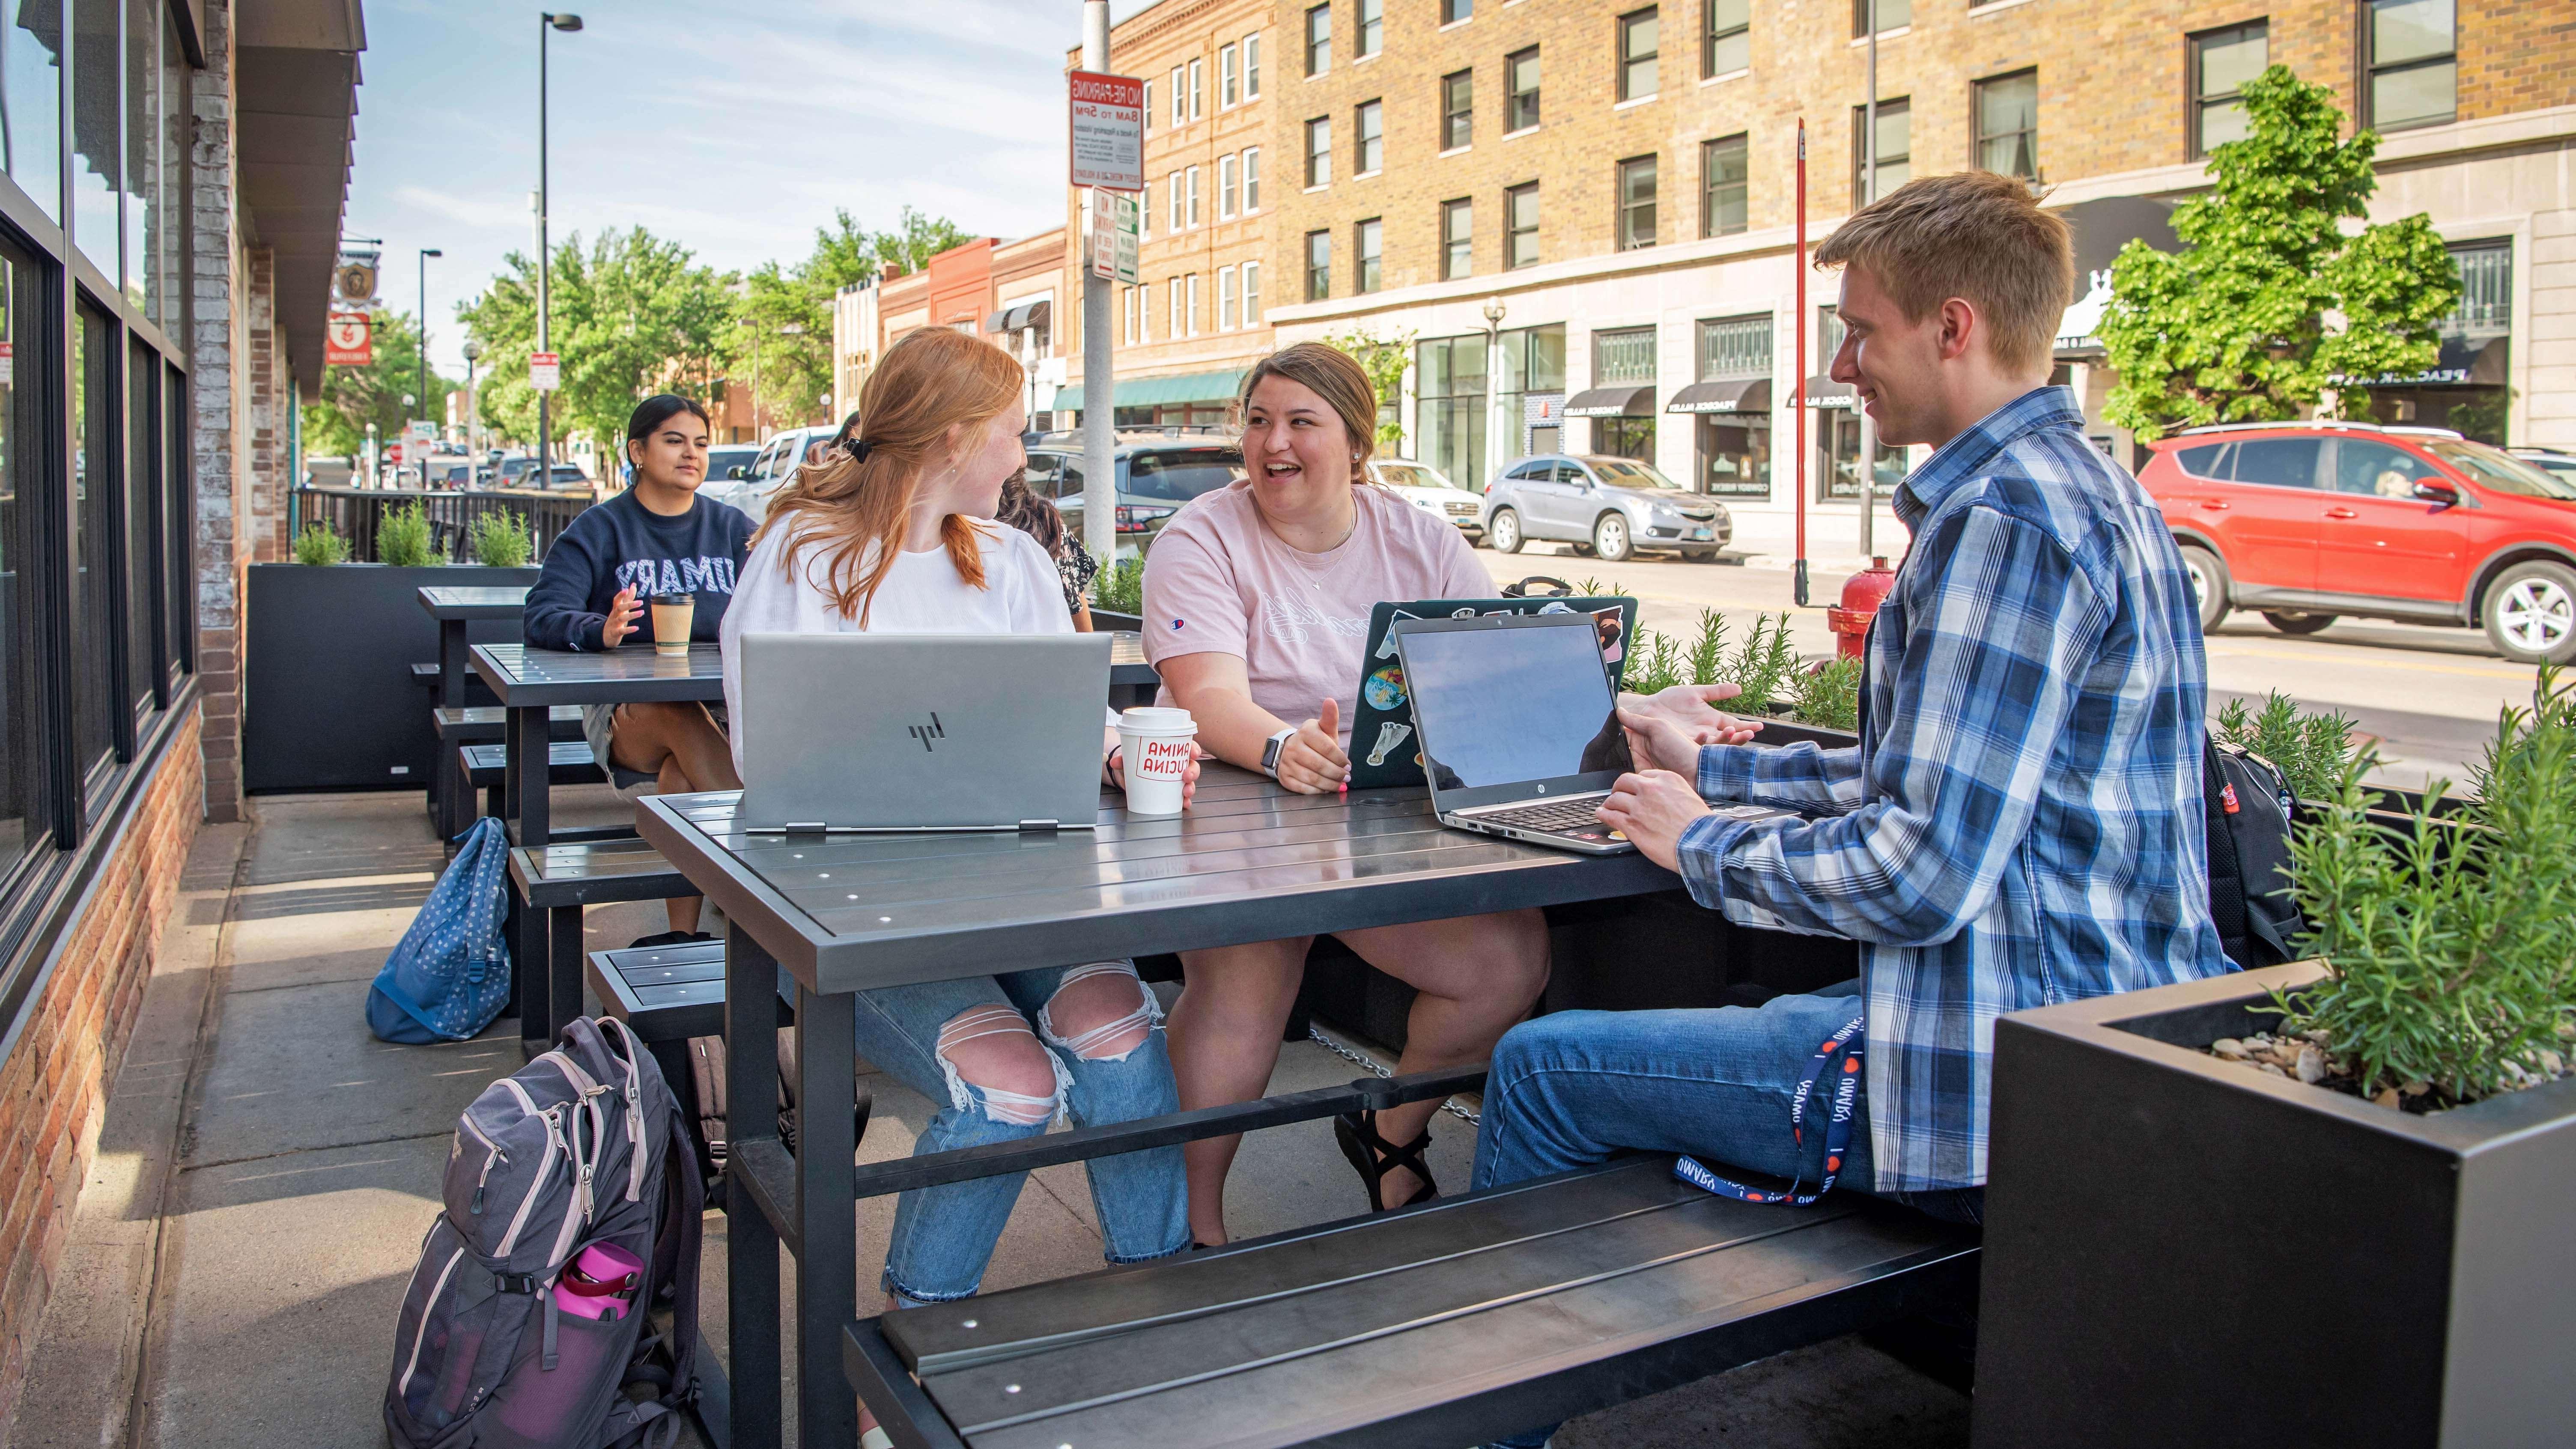 Three University of Mary students sitting at picnic table outside a restaurant in downtown Bismarck